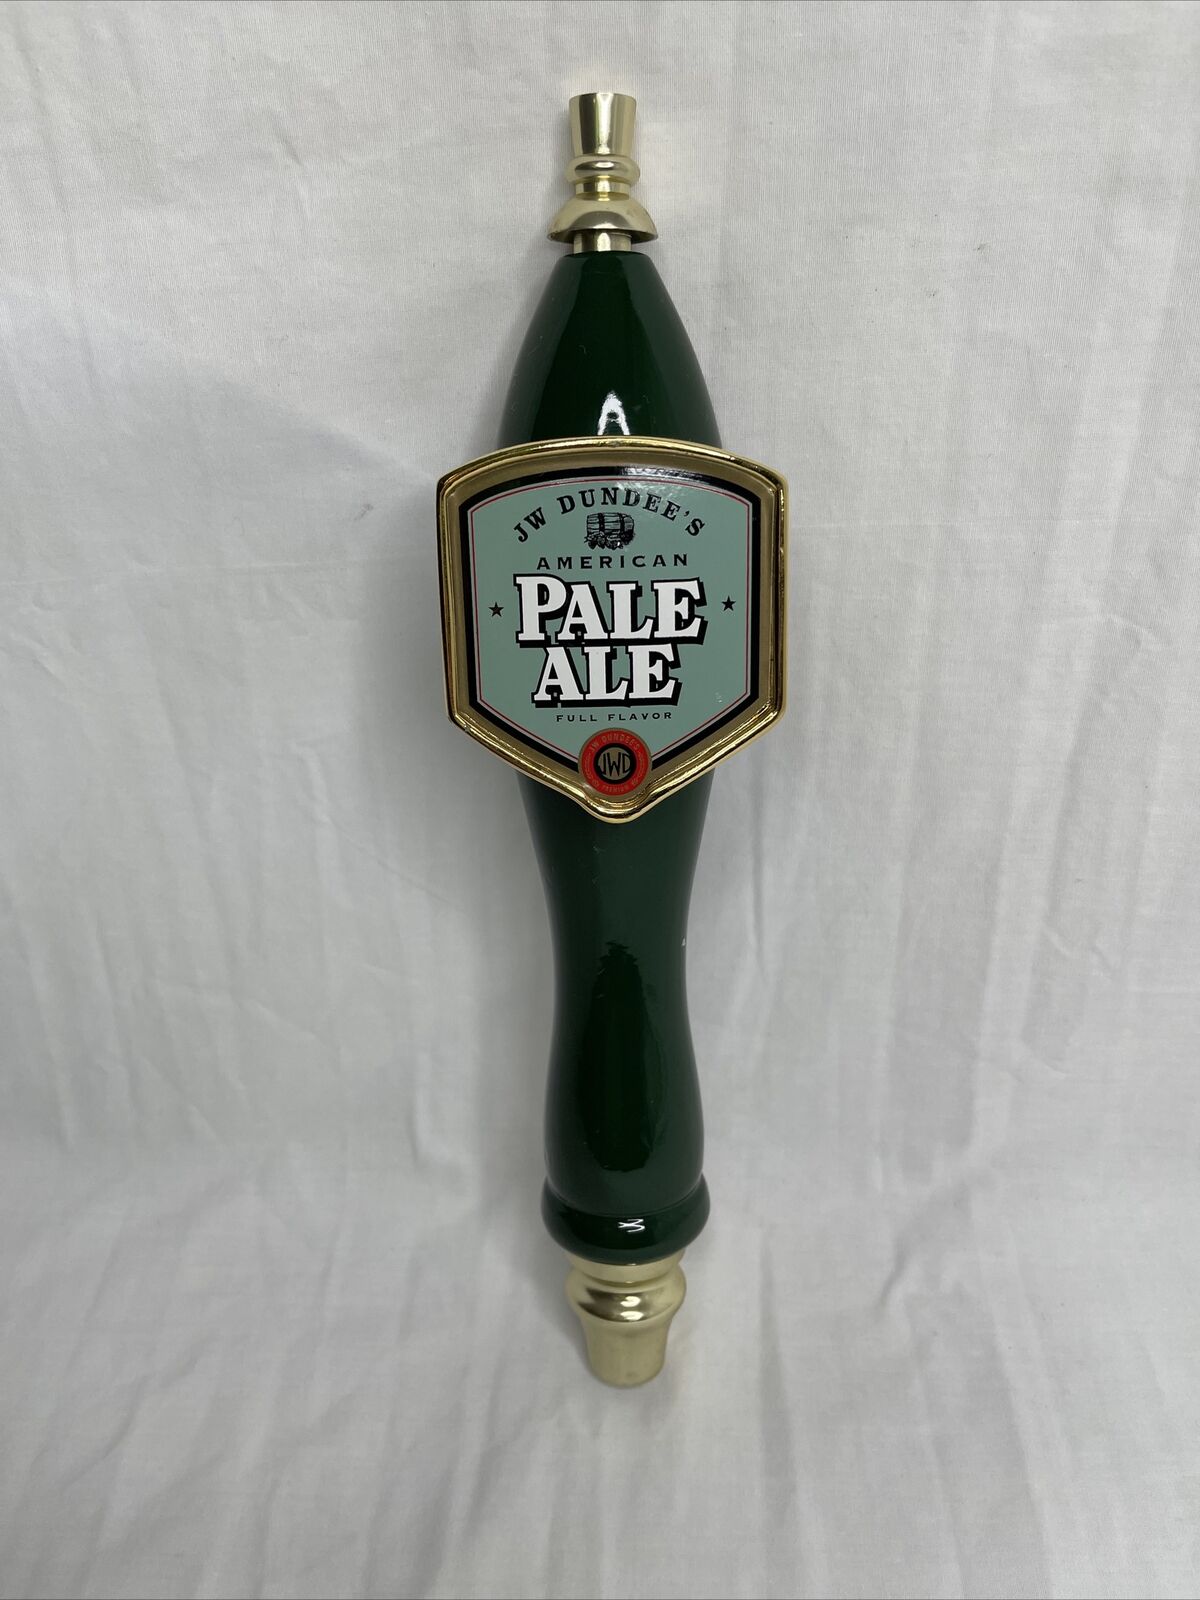 RARE Vintage JW Dundee’s Original Ales And Lagers Pale Ale Beer Tap Handle